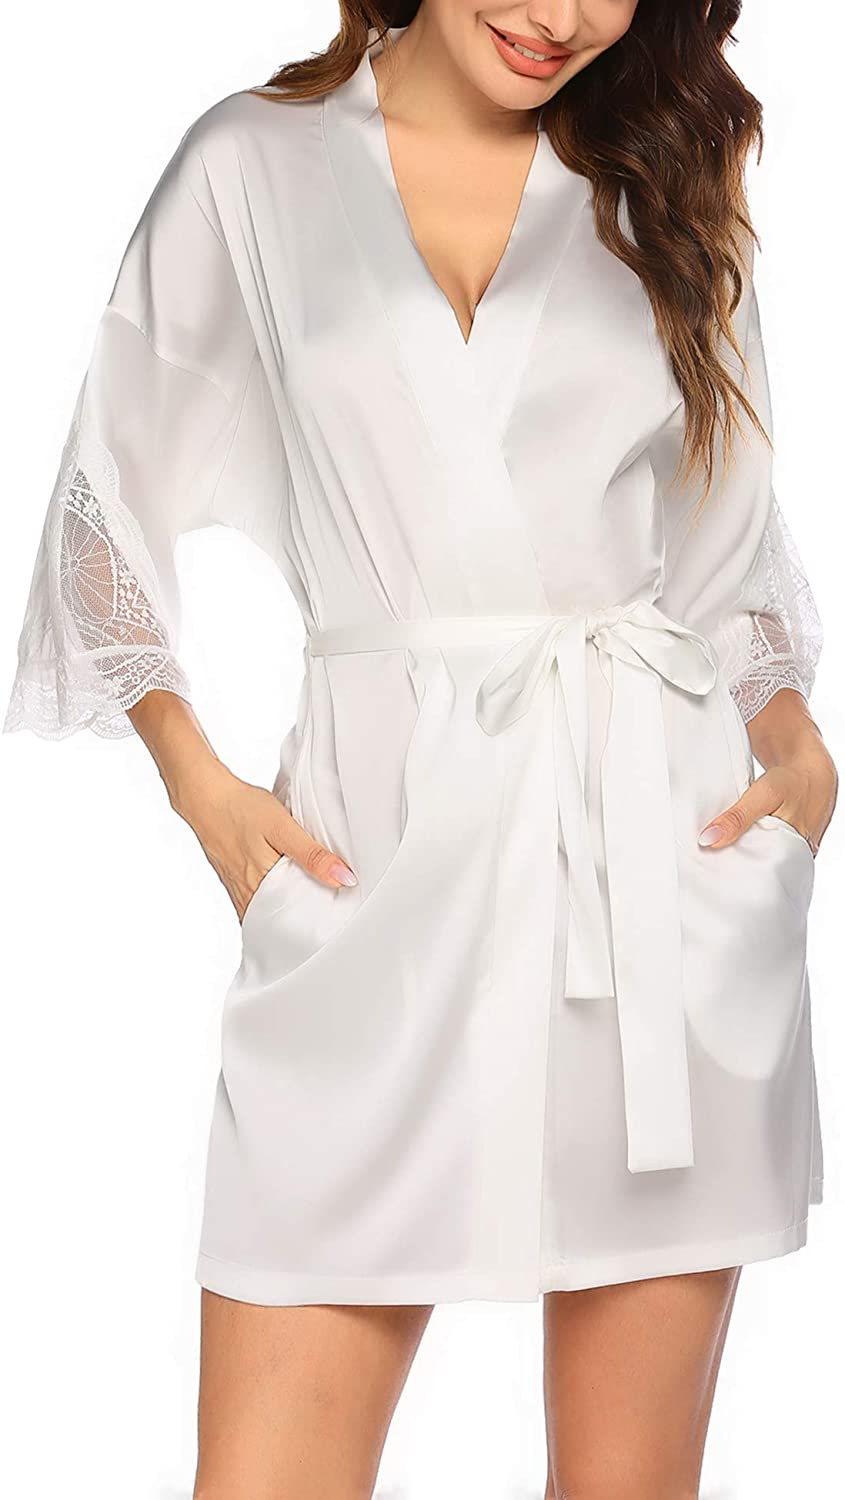 Hotouch Women's Pure Color Short Satin Kimono Robes with Oblique V